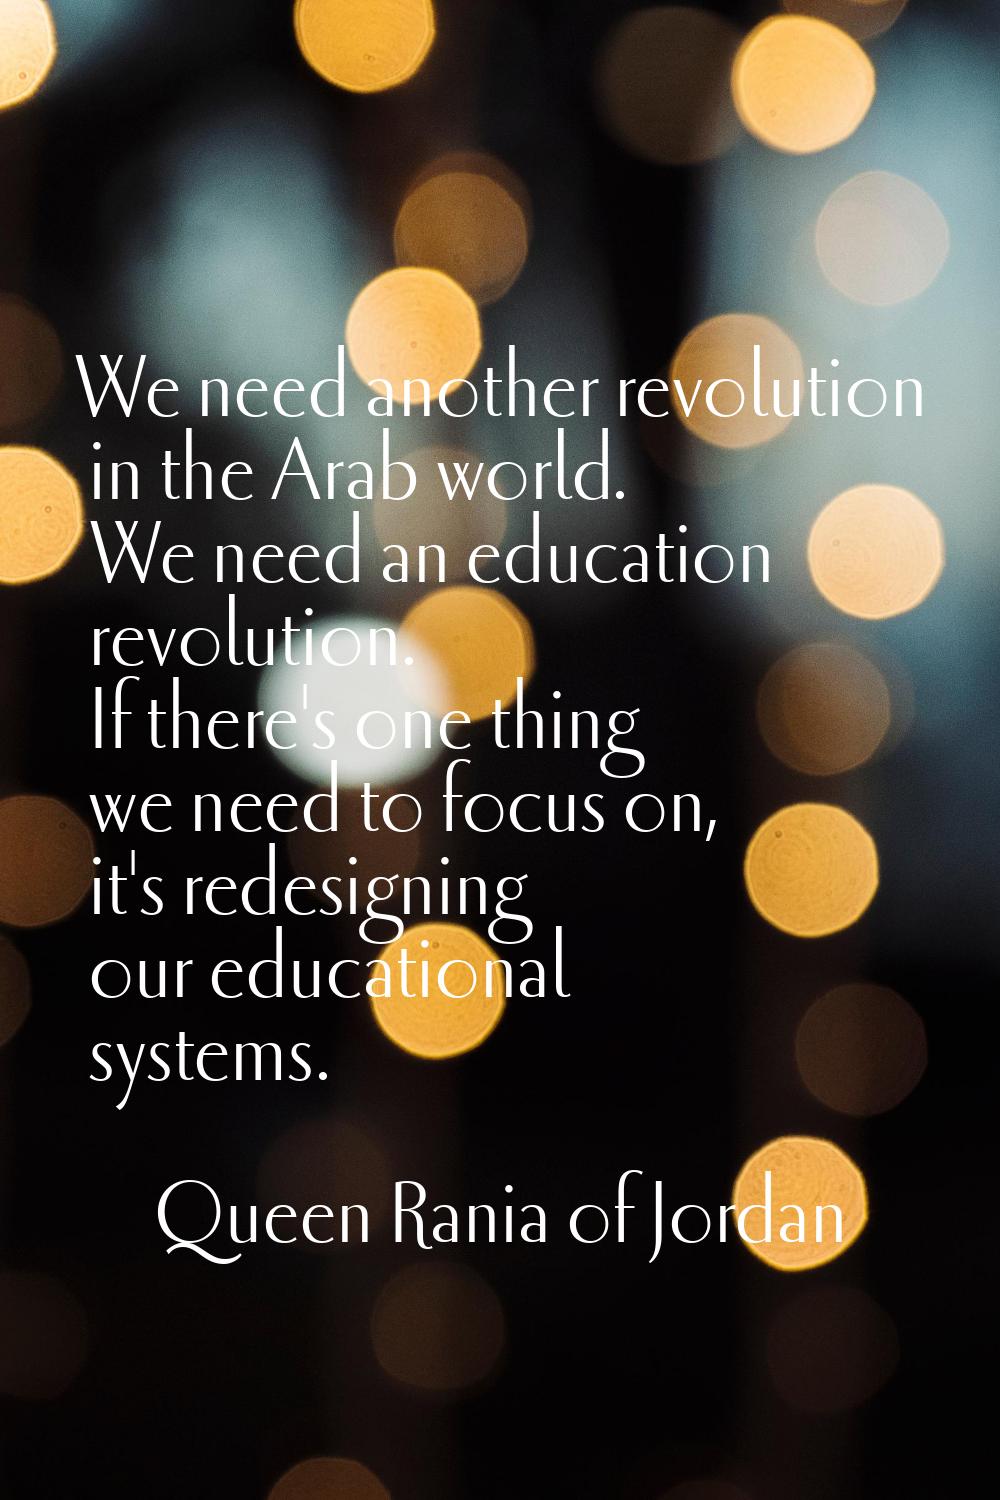 We need another revolution in the Arab world. We need an education revolution. If there's one thing